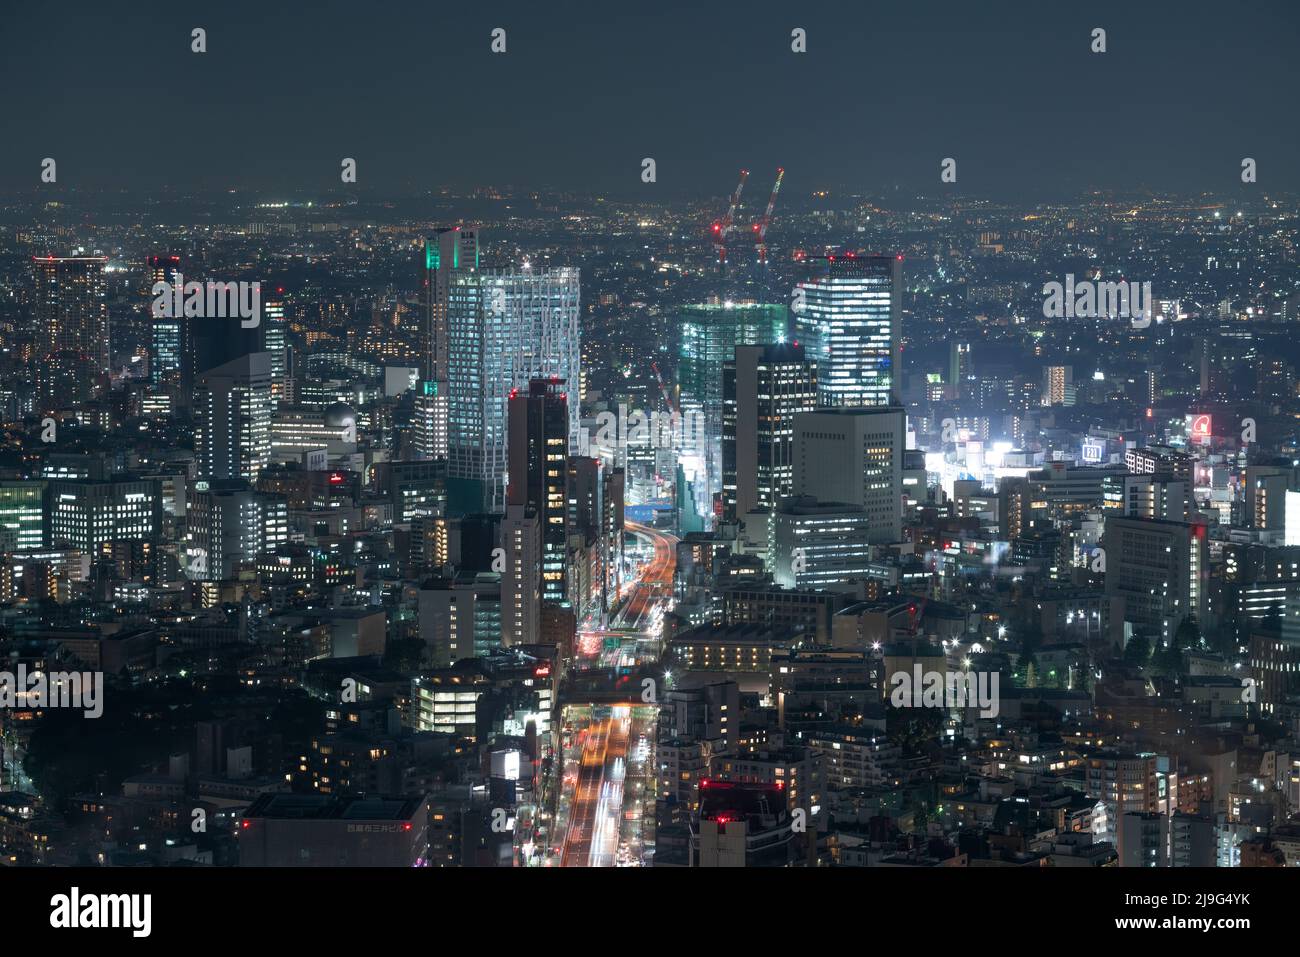 The streets of Tokyo Japan at Night Stock Photo